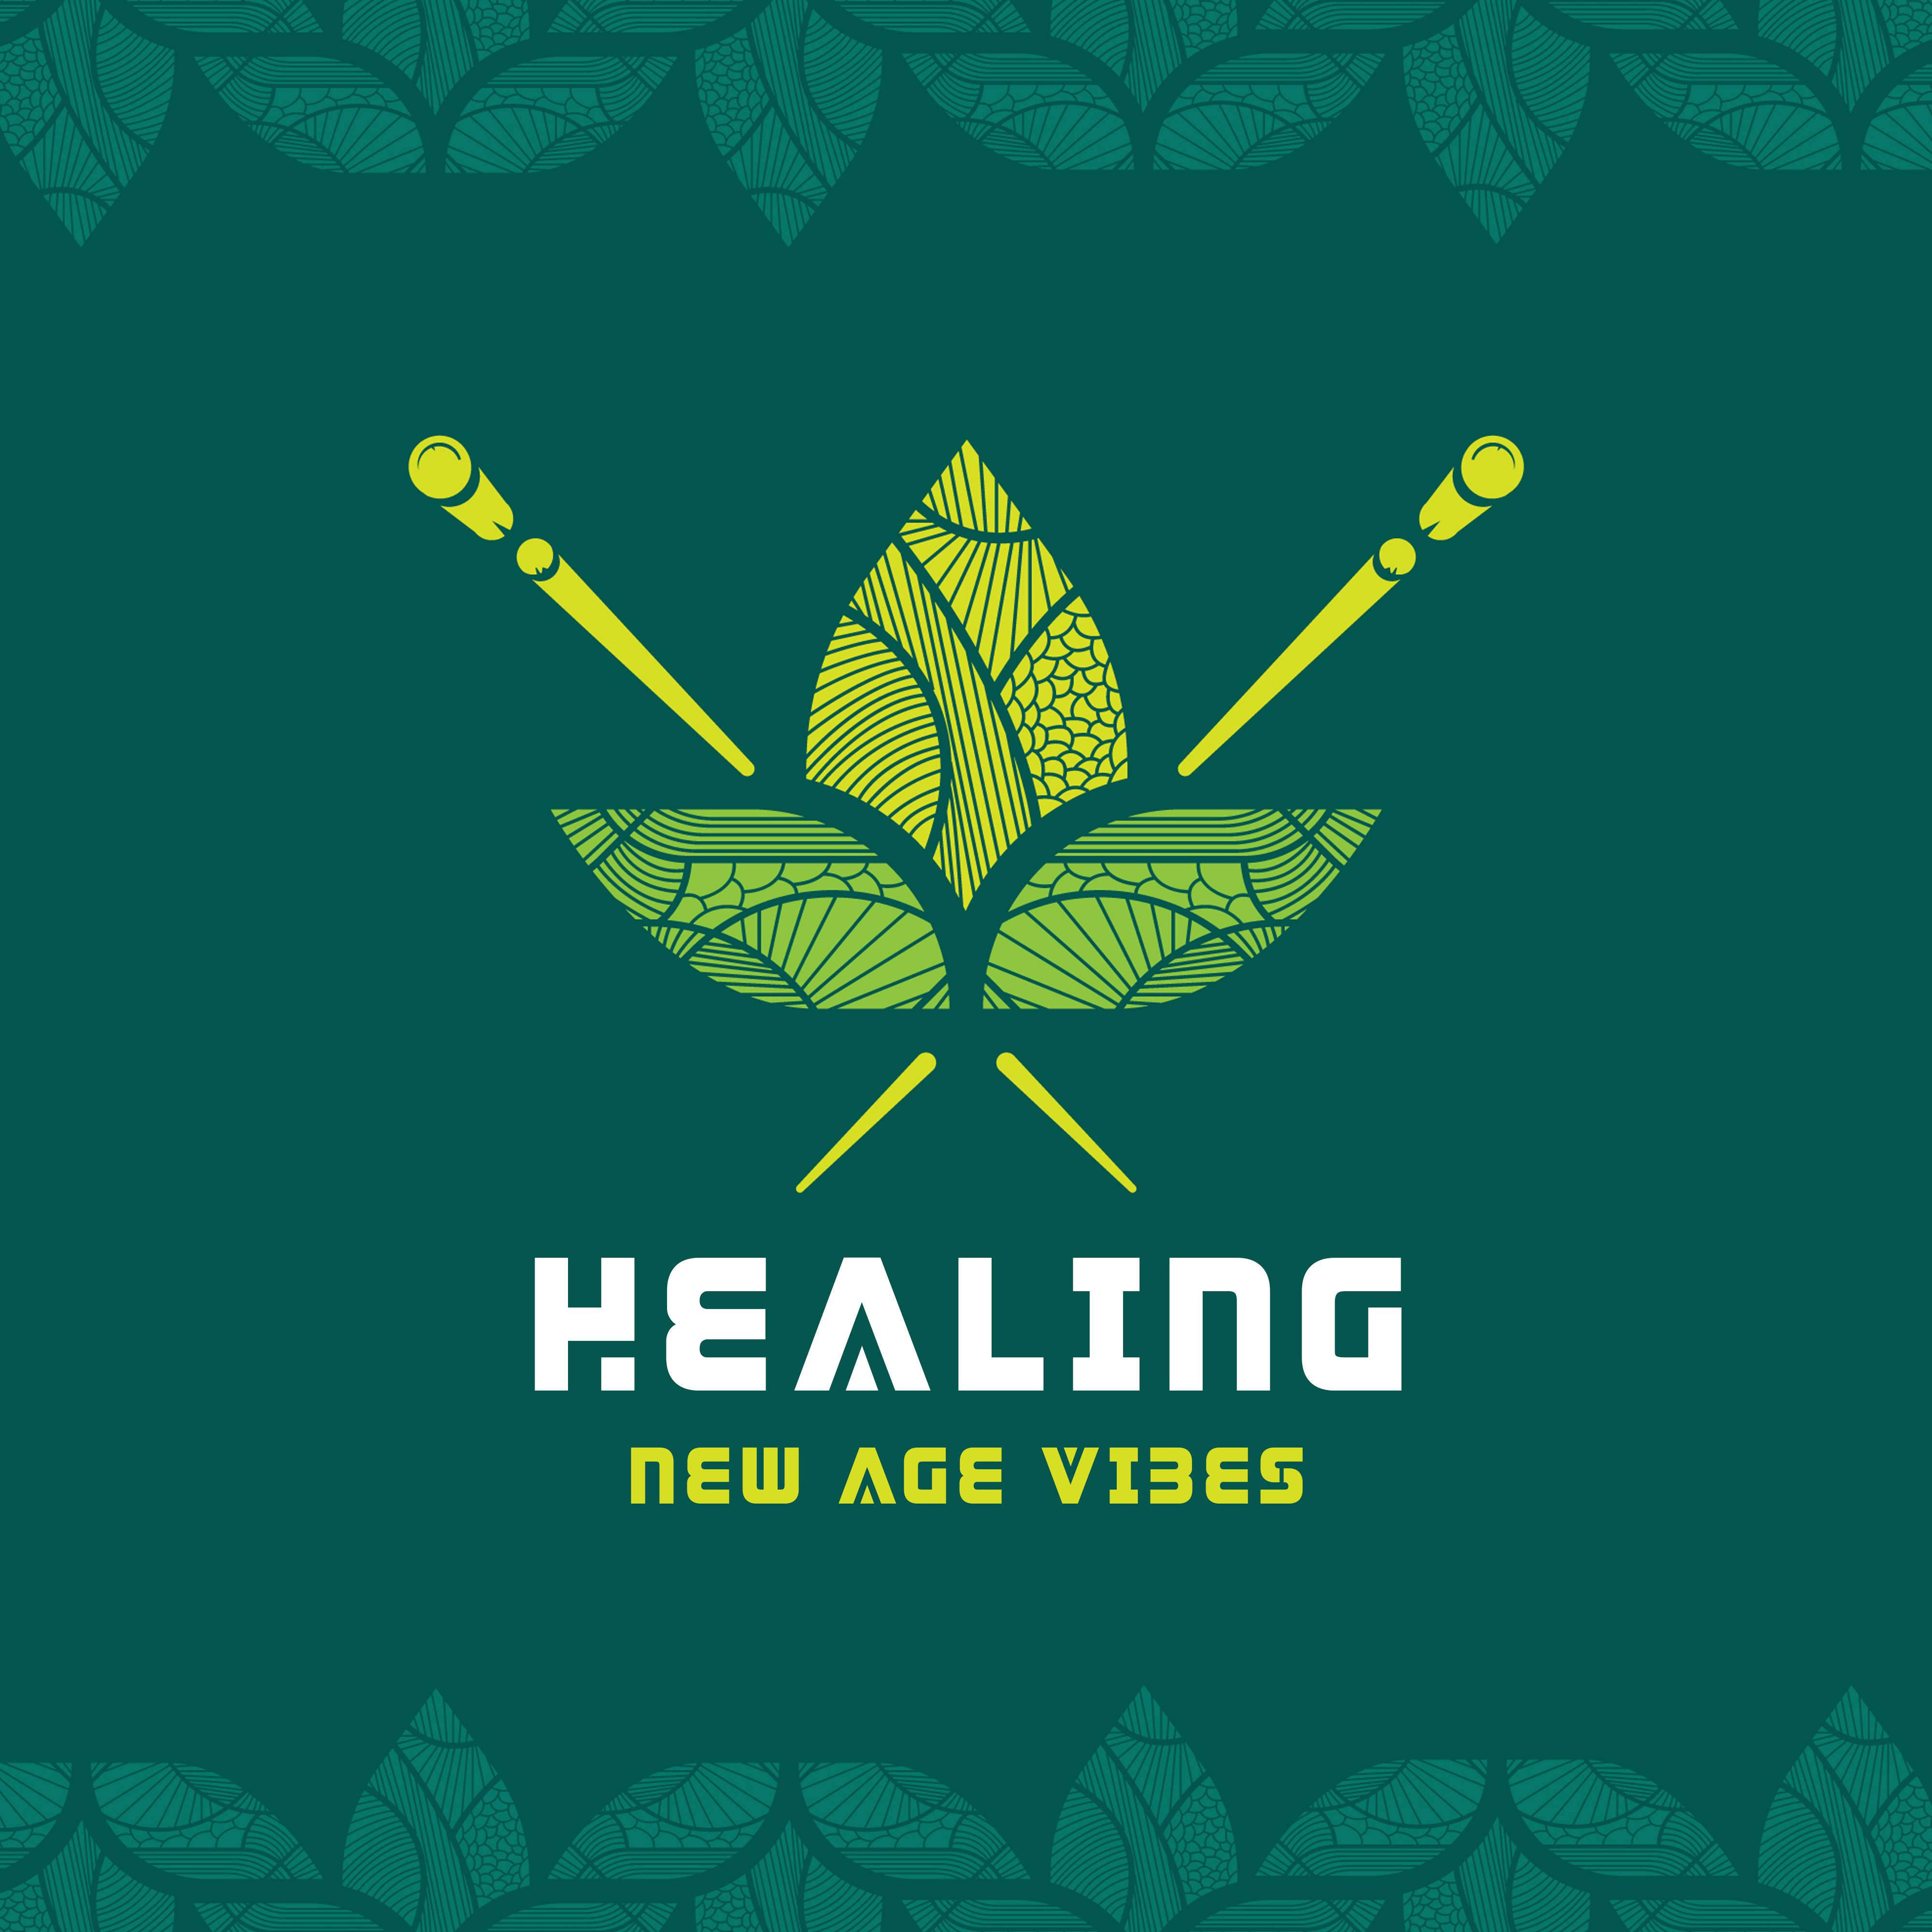 Healing New Age Vibes